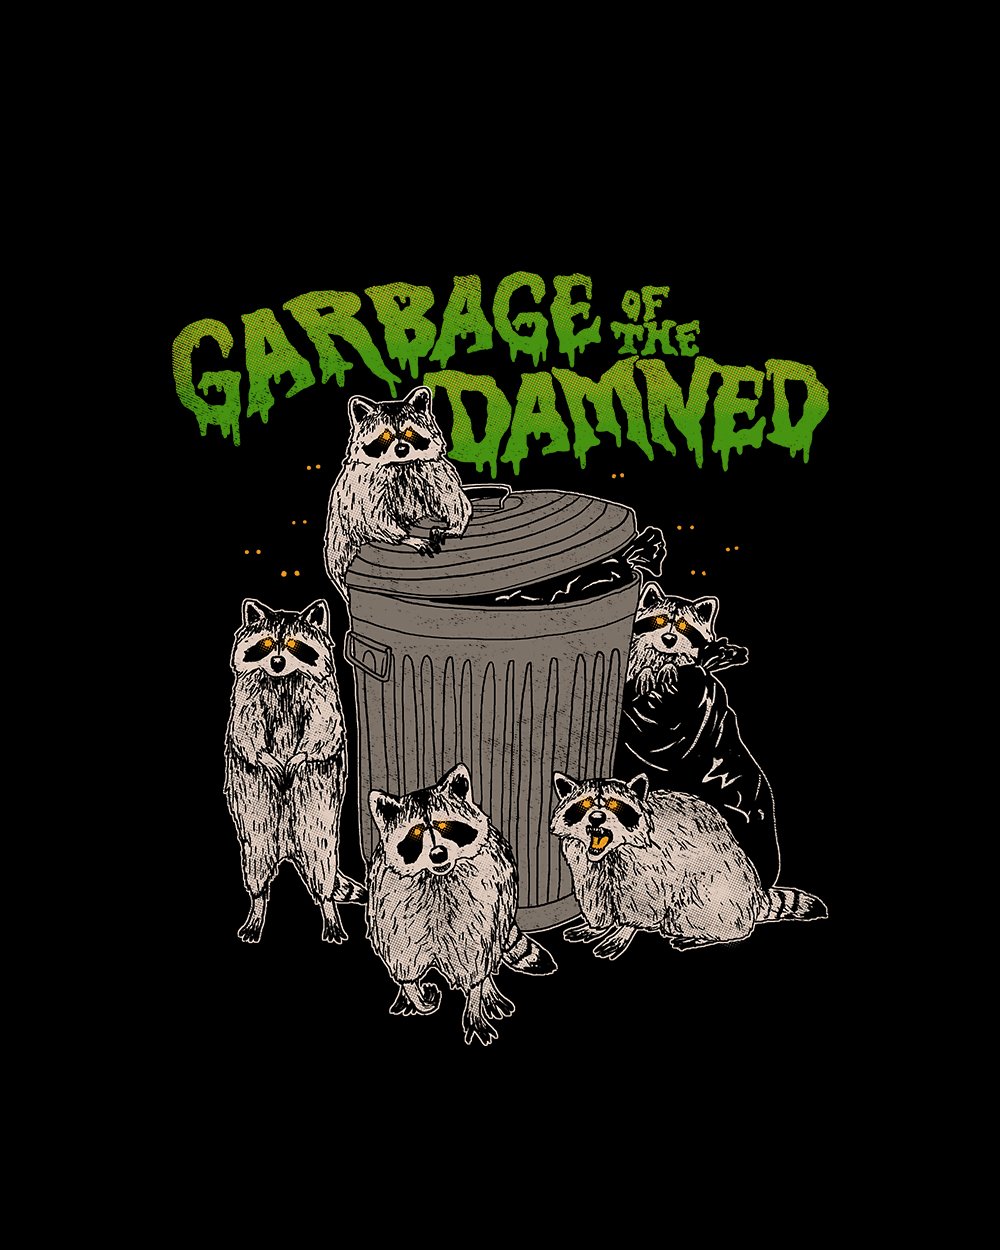 Garbage of the Damned Sweater Australia Online #colour_black